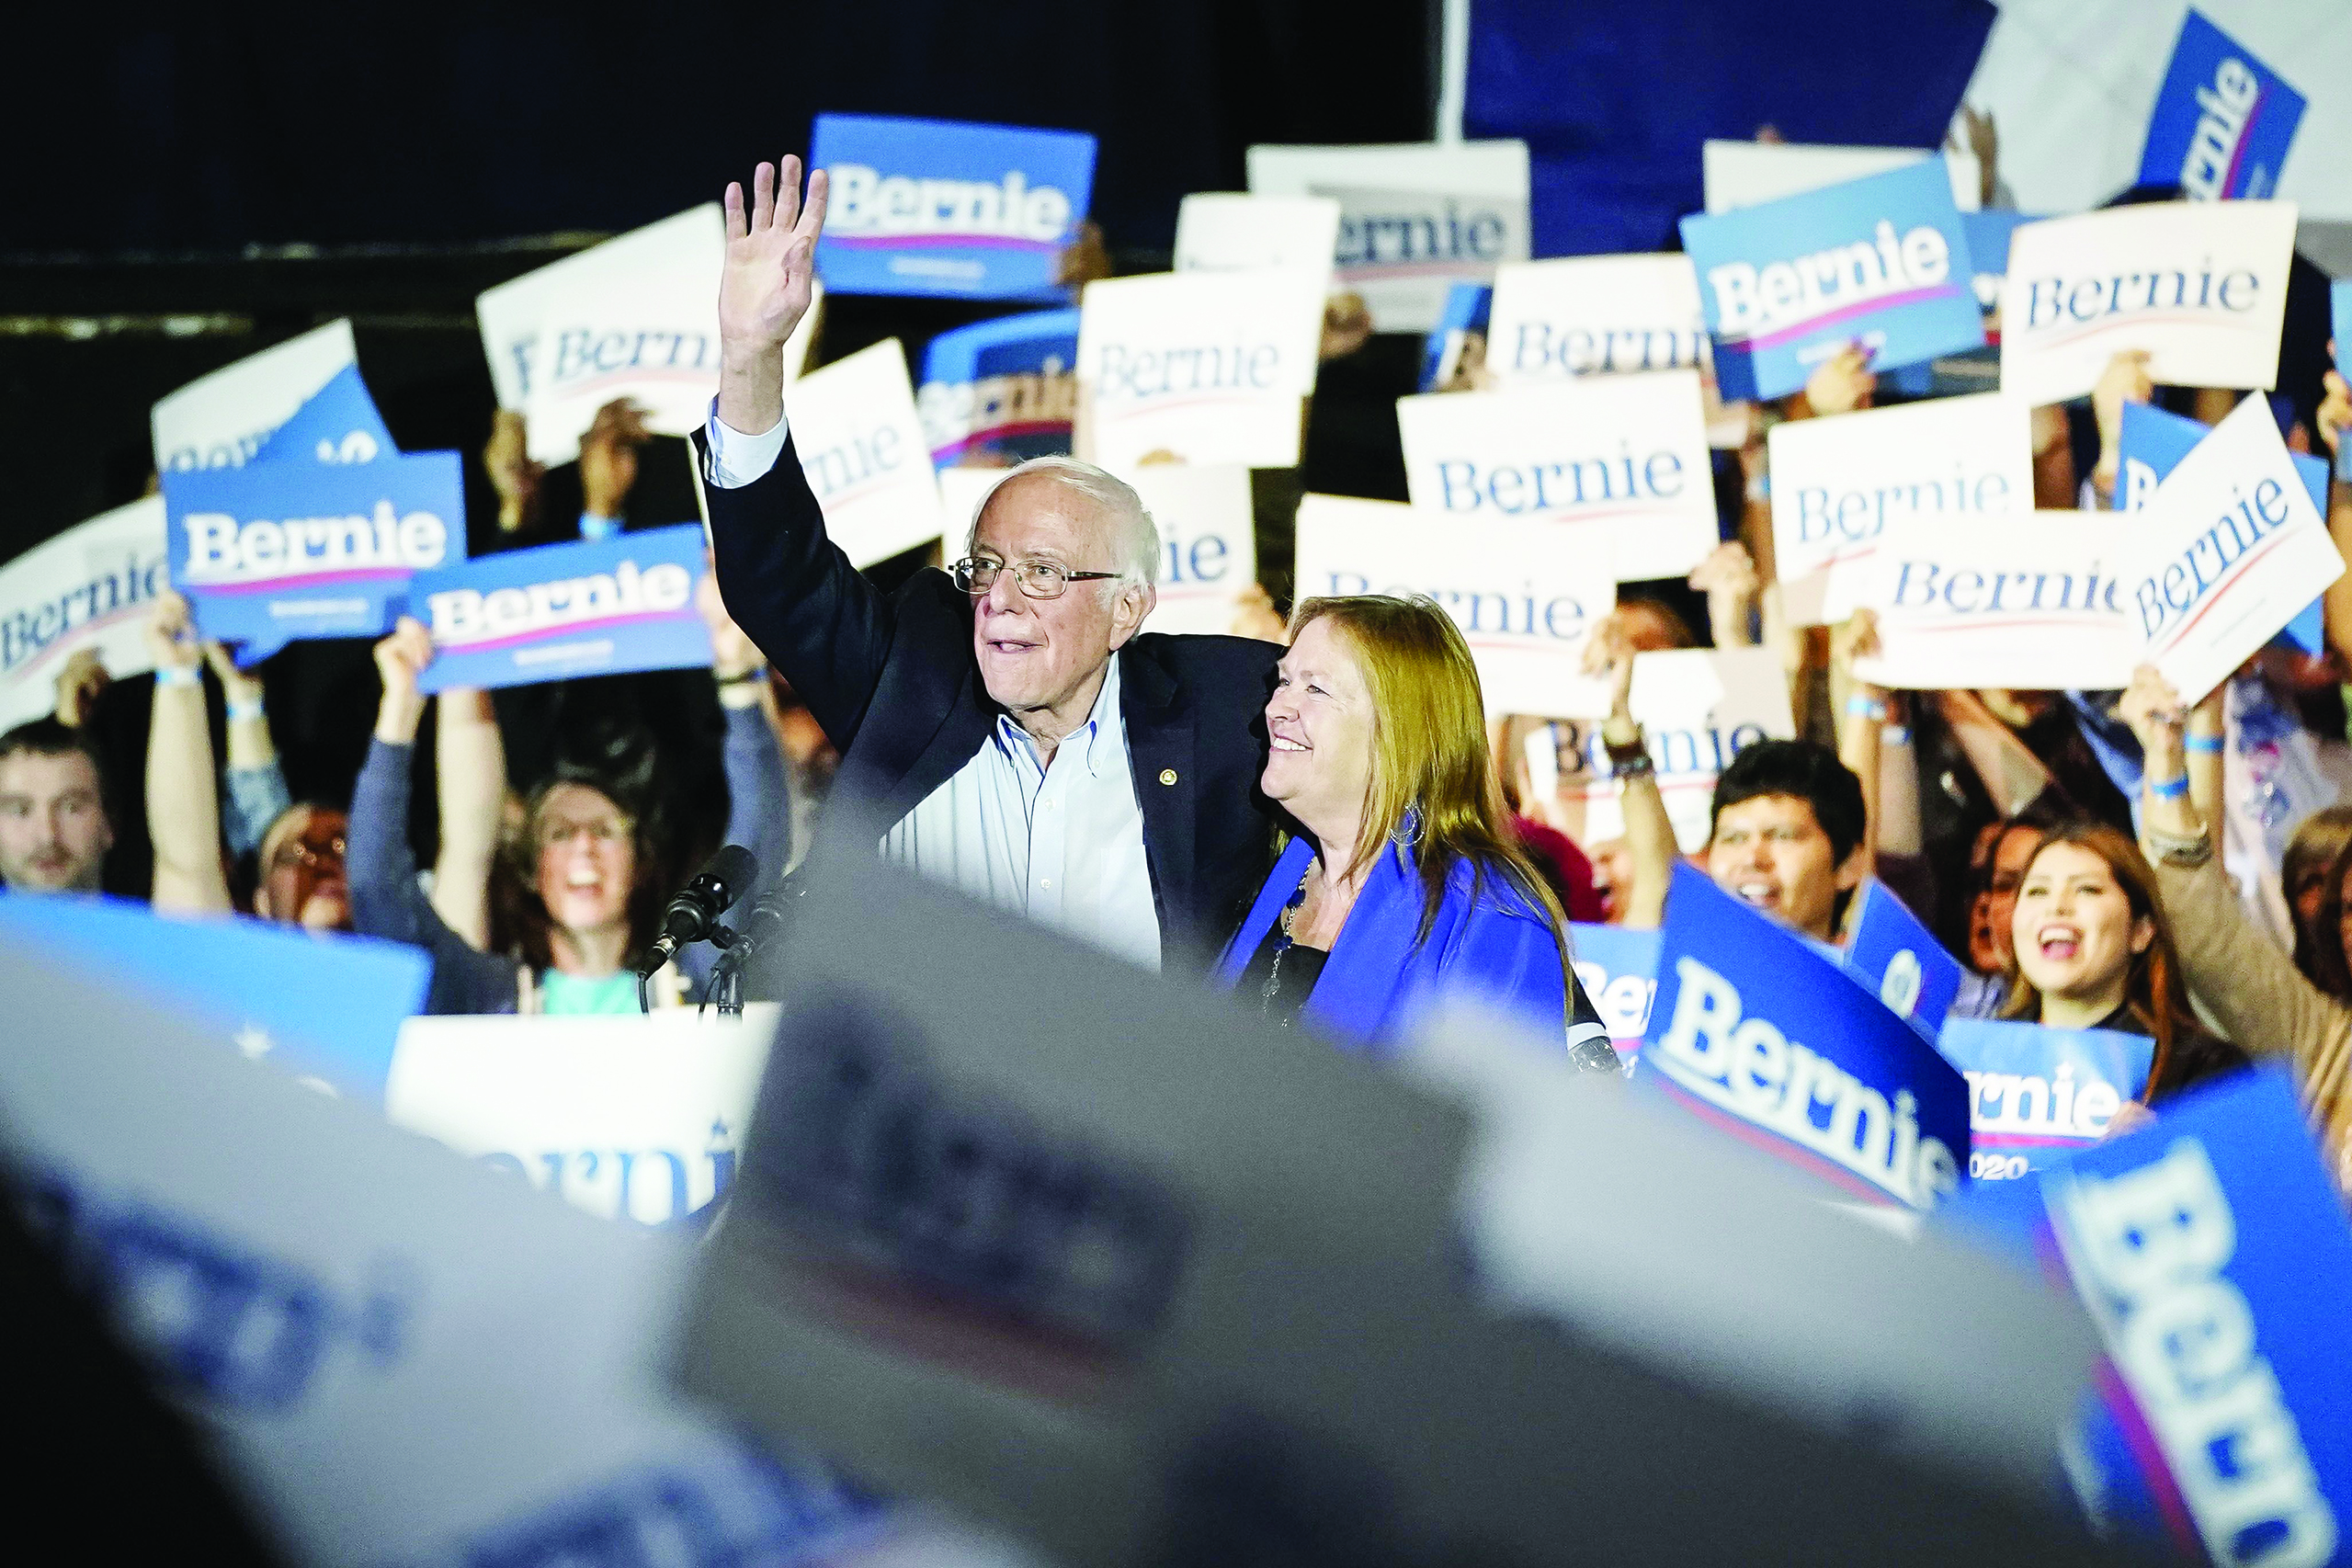 SAN ANTONIO, TX - FEBRUARY 22: Democratic presidential candidate Sen. Bernie Sanders (I-VT) and his wife Jane Sanders wave as they exit the stage after winning the Nevada caucuses during a campaign rally at Cowboys Dancehall on February 22, 2020 in San Antonio, Texas. With early voting underway in Texas, Sanders is holding four rallies in the delegate-rich state this weekend before traveling on to South Carolina. Texas holds their primary on Super Tuesday March 3rd, along with over a dozen other states   Drew Angerer/Getty Images/AFPn== FOR NEWSPAPERS, INTERNET, TELCOS &amp; TELEVISION USE ONLY ==